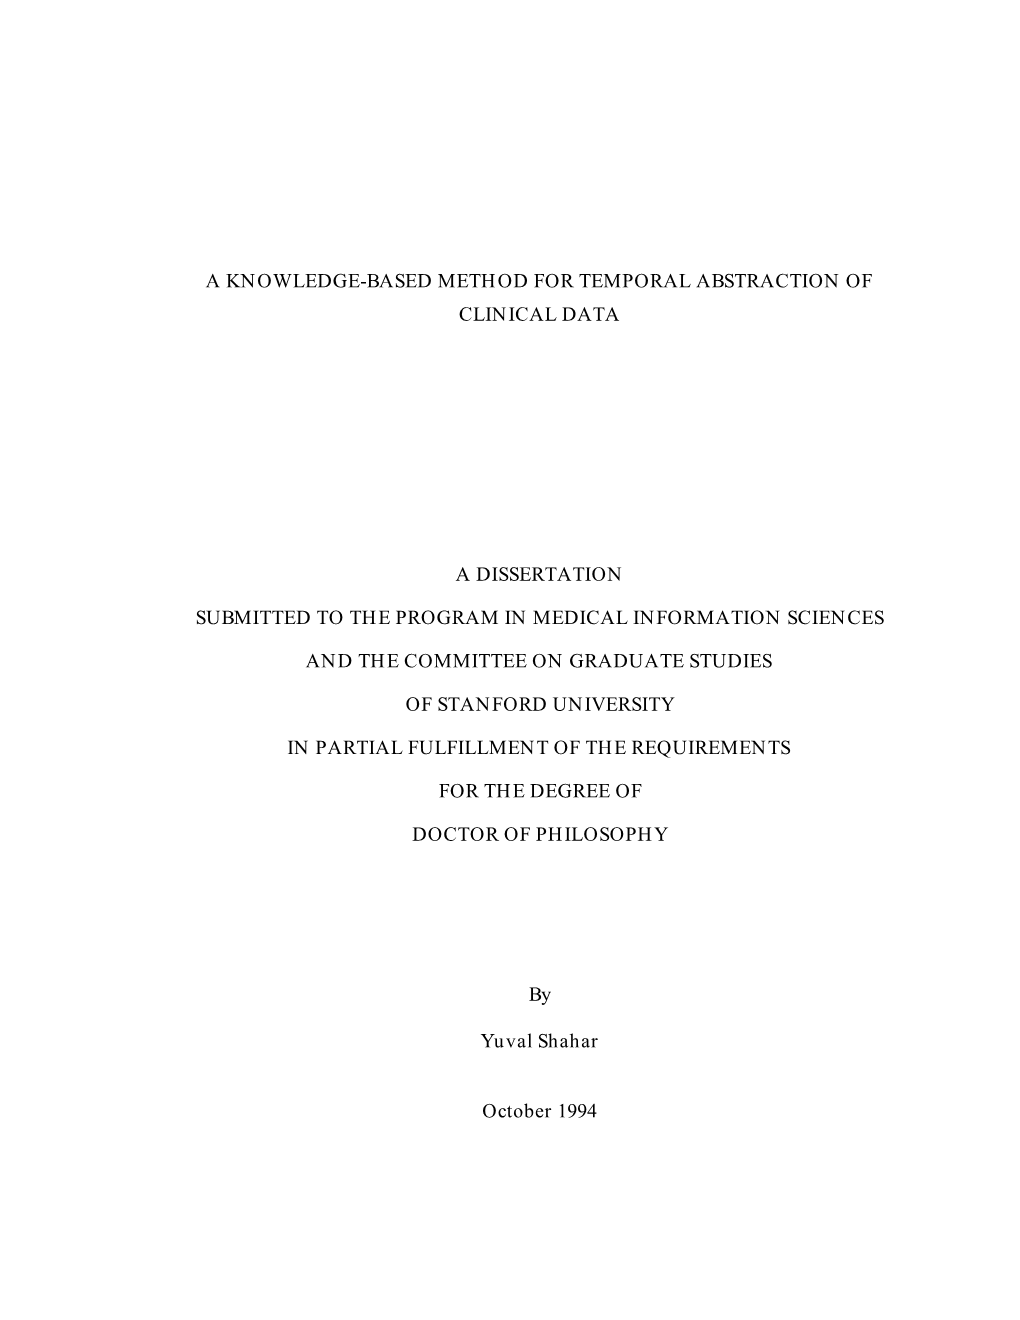 A Knowledge-Based Method for Temporal Abstraction of Clinical Data a Dissertation Submitted to the Program in Medical Informatio